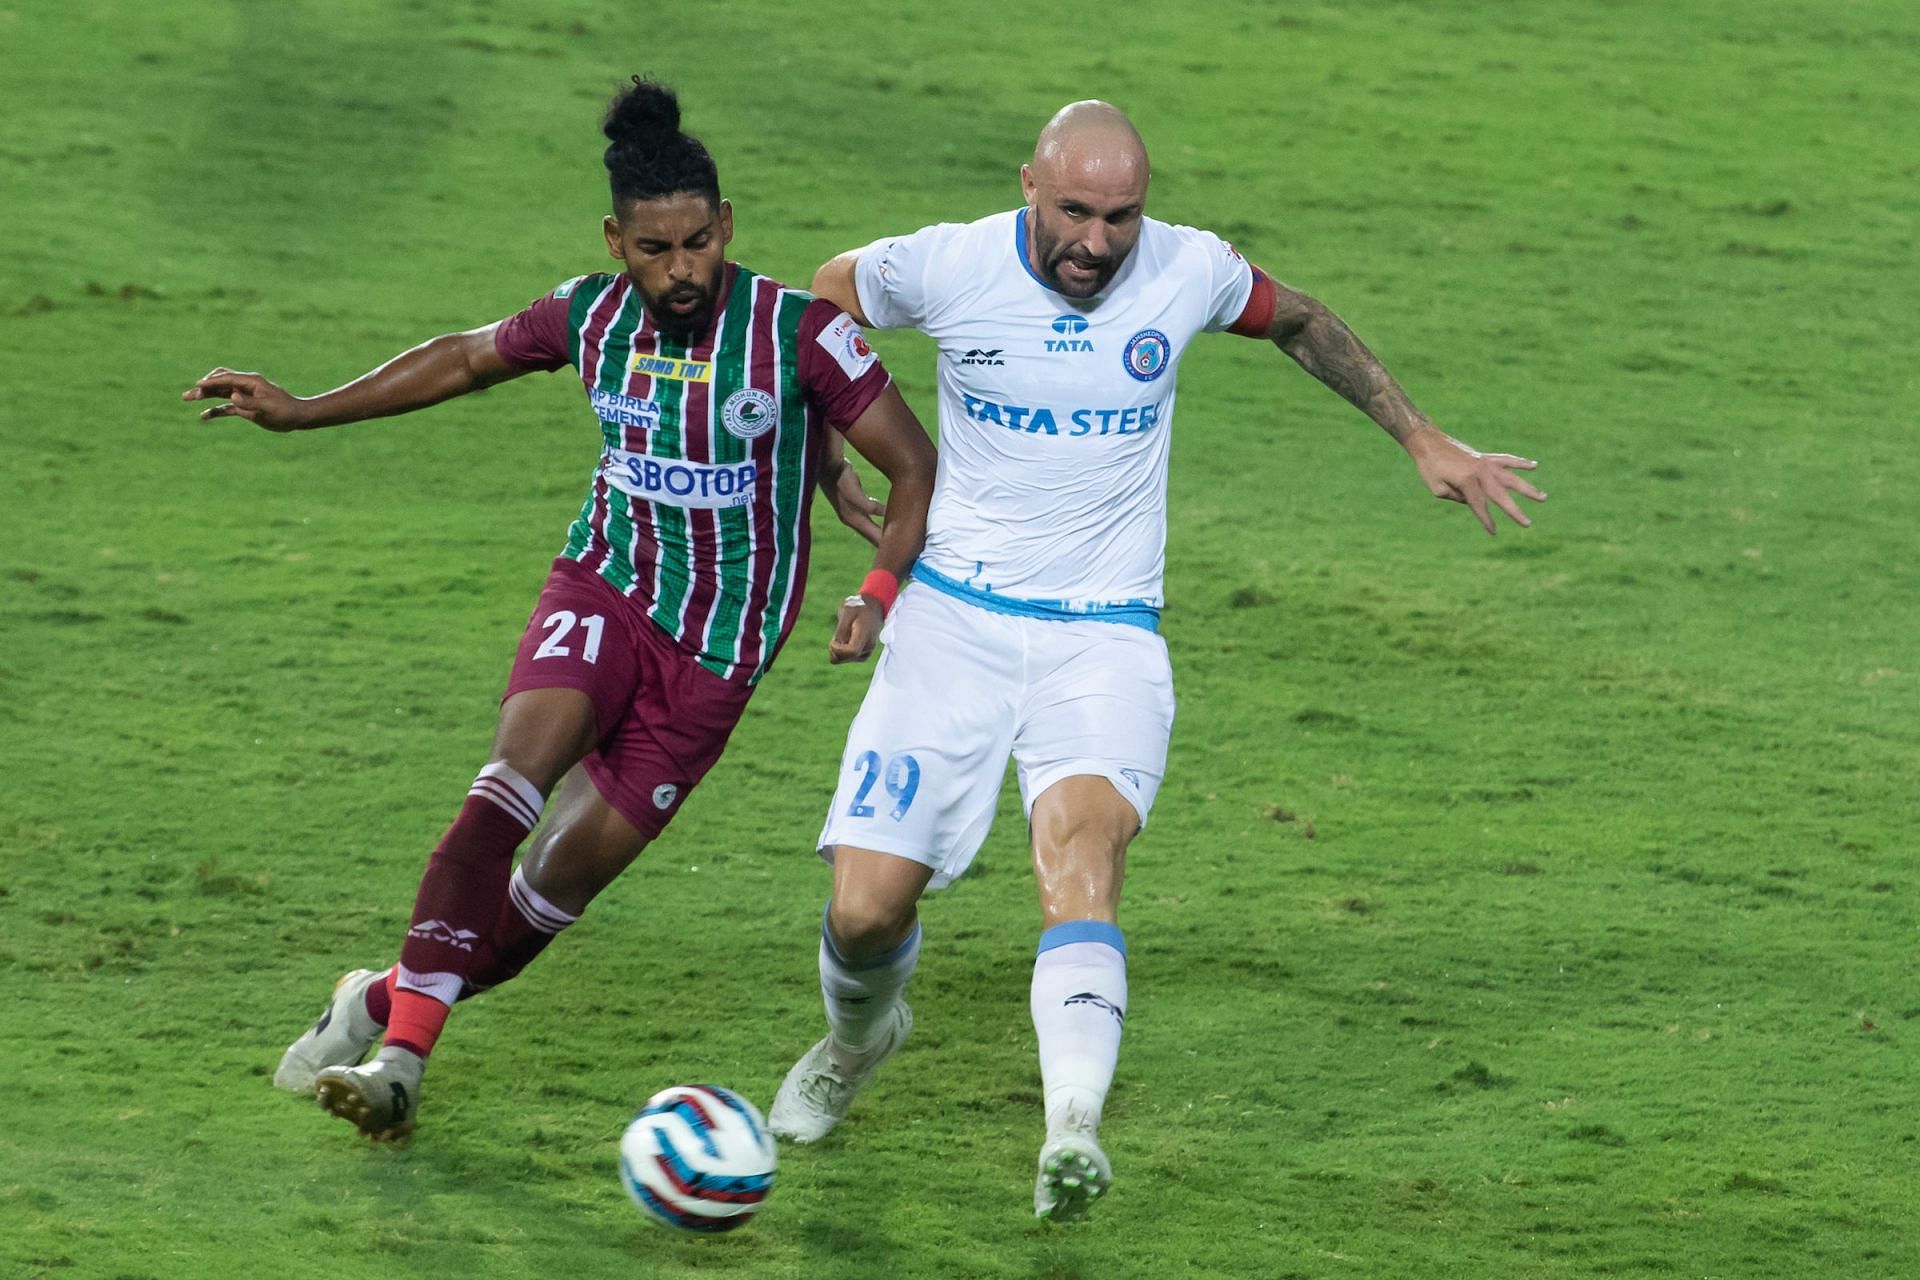 JFC&#039;s Peter Hartley and ATKMB&#039;s Roy Krishna in action. [Credits: ISL]